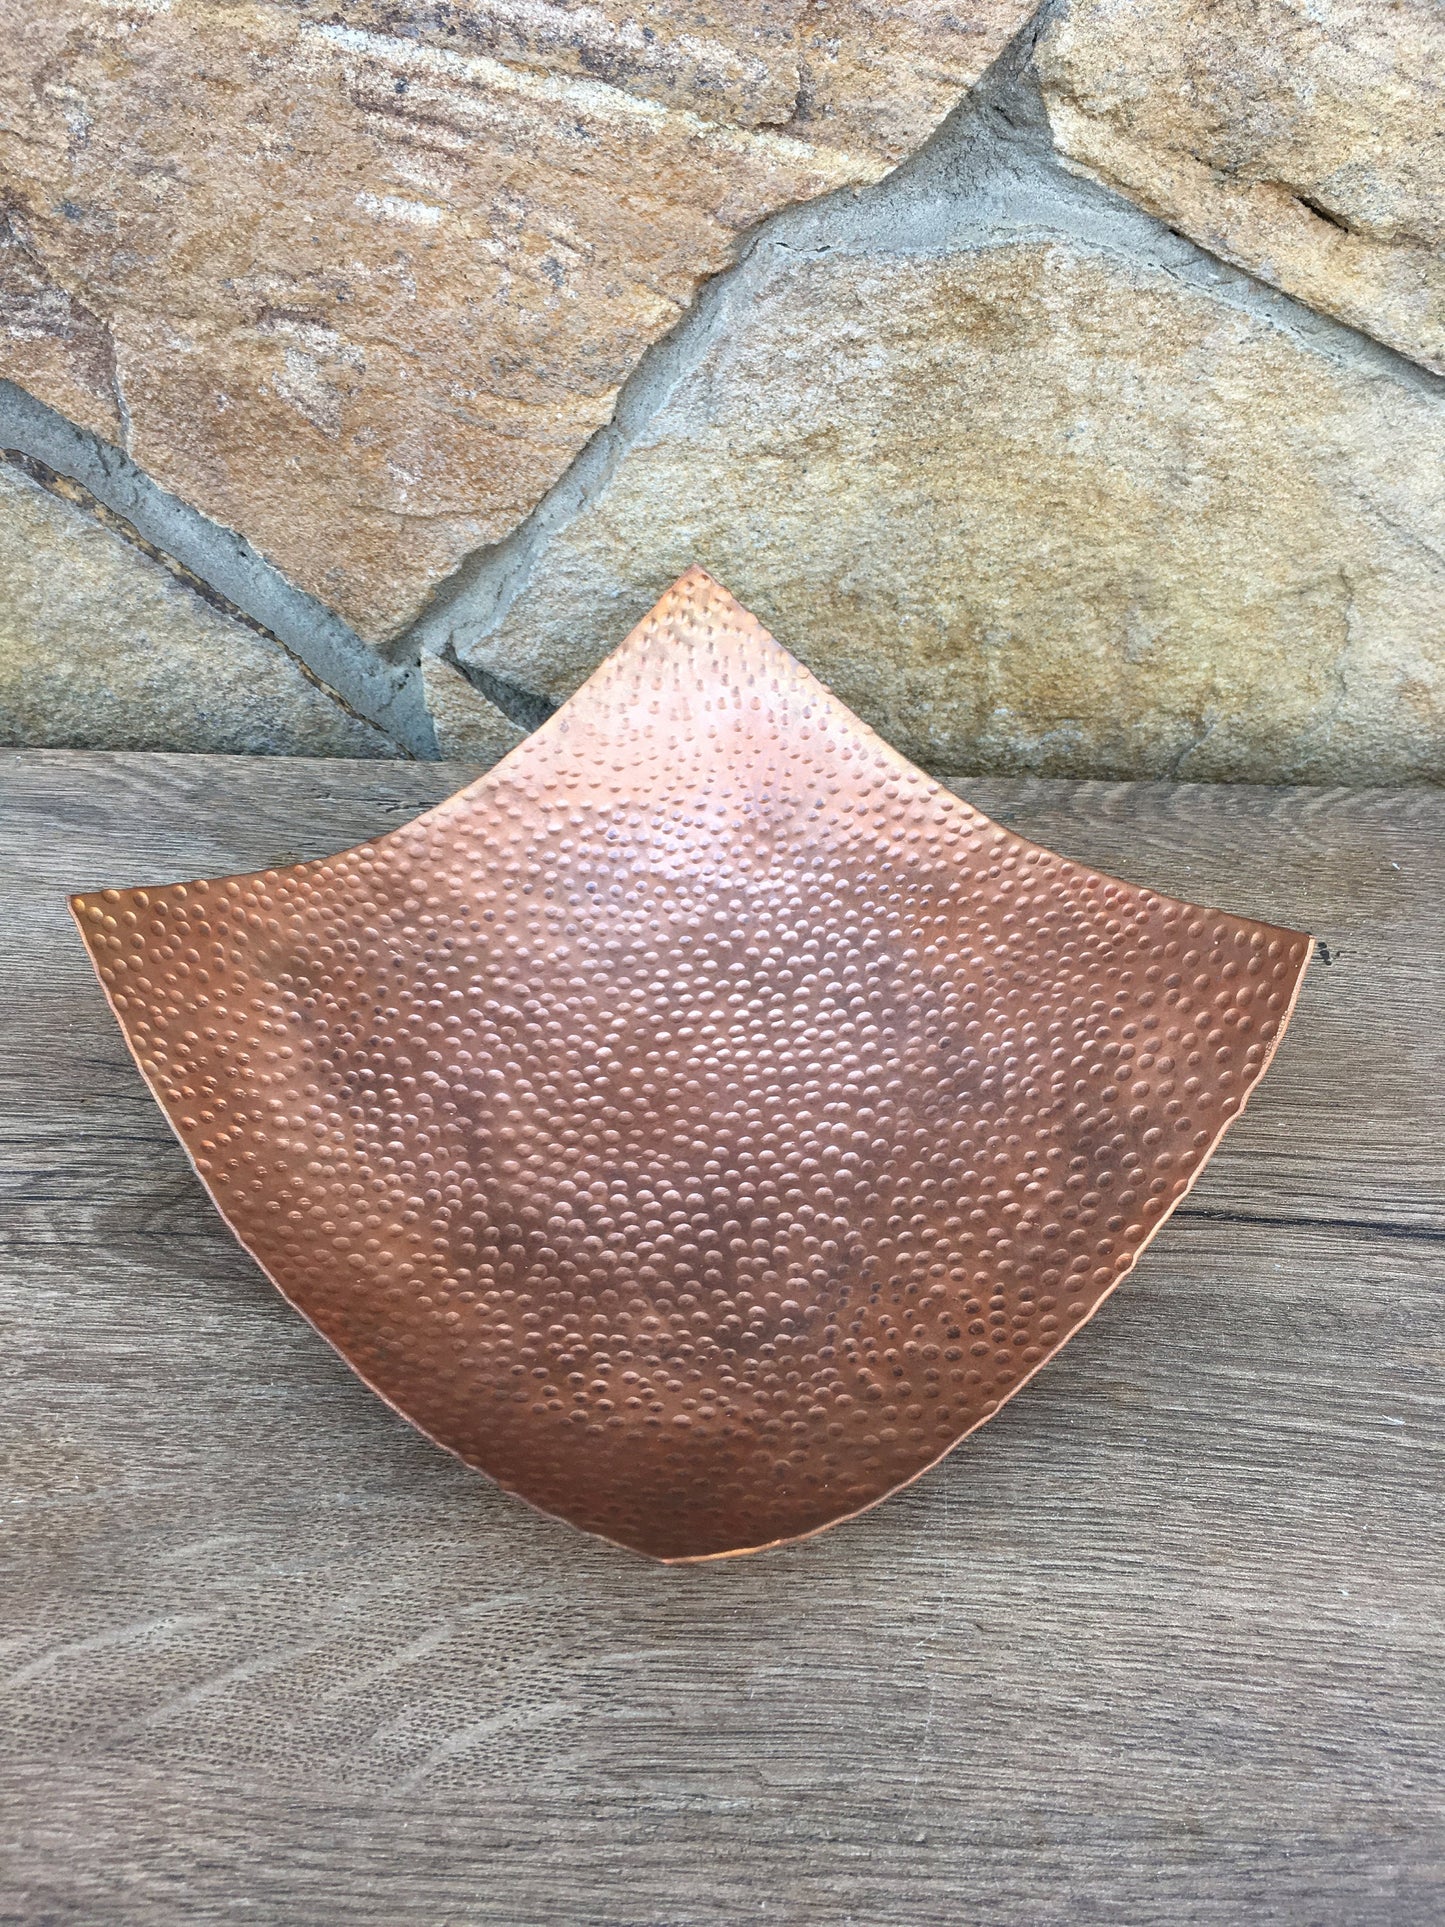 Hammered copper bowl, copper anniversary gift, 7 year anniversary gift, copper gifts, 7 year gifts, copper gift for her, copper gift for men